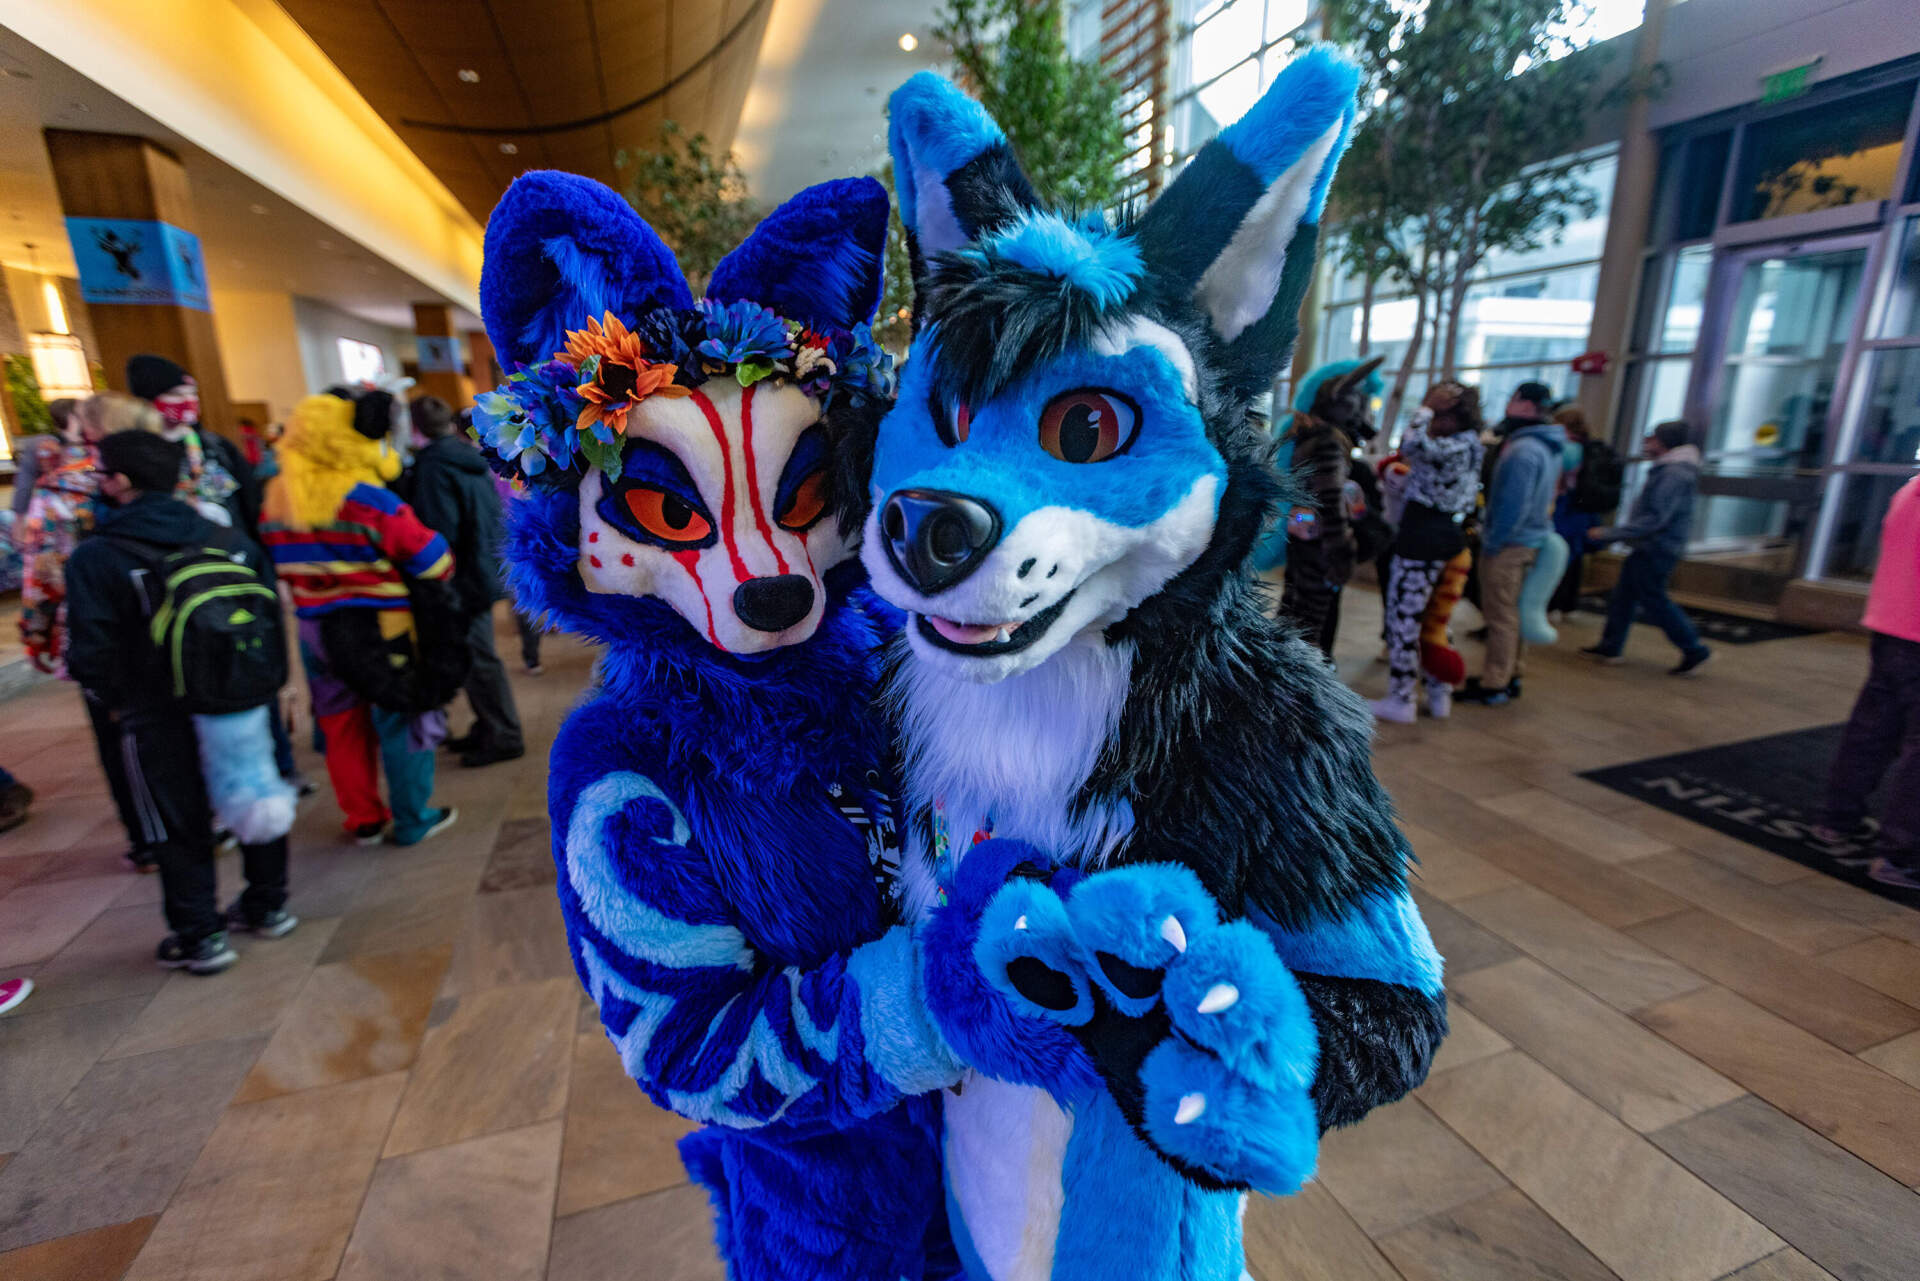 Meet some furries attending the Anthro New England convention WBUR News